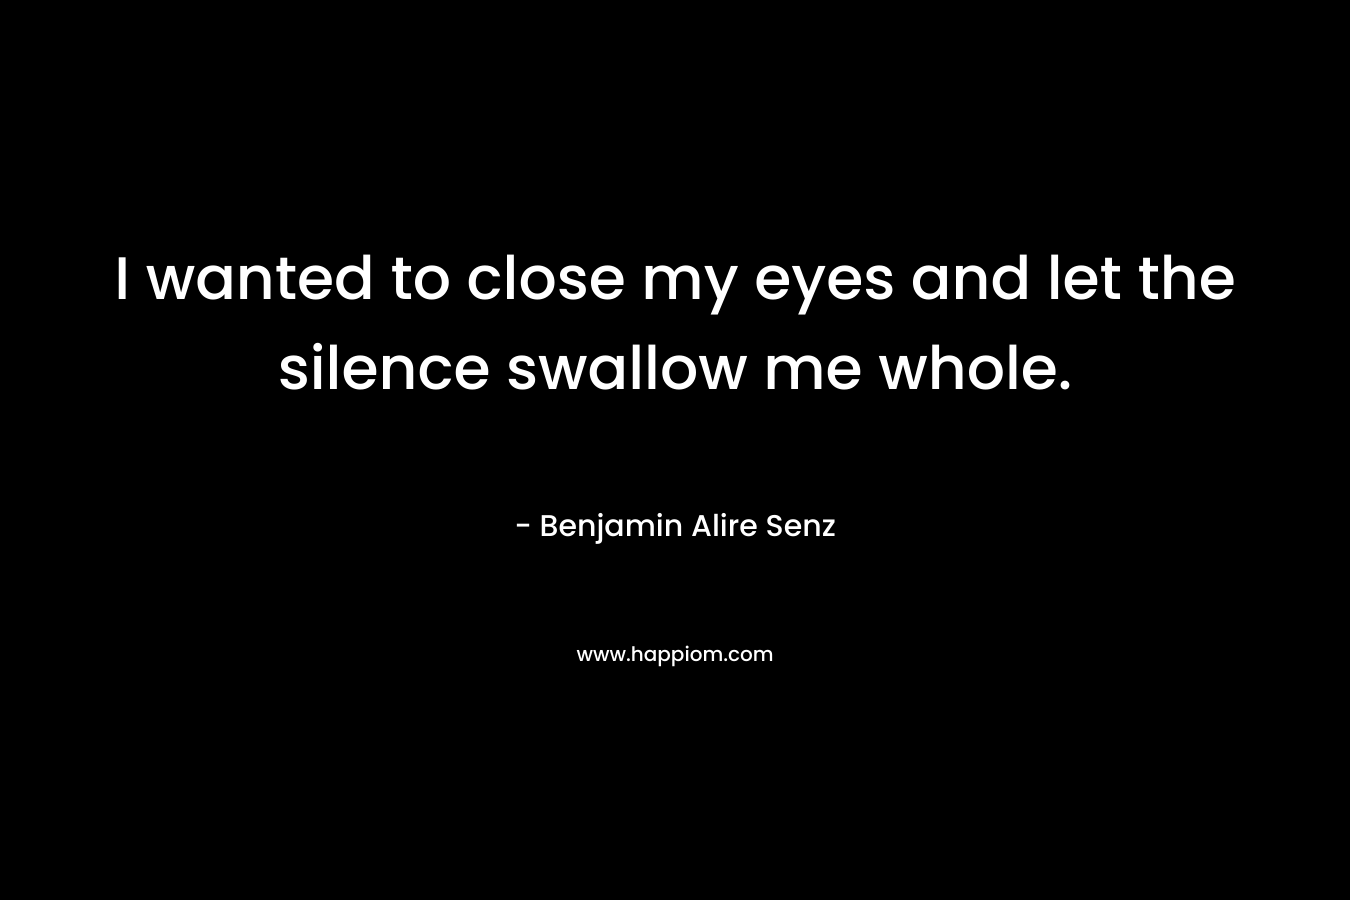 I wanted to close my eyes and let the silence swallow me whole.